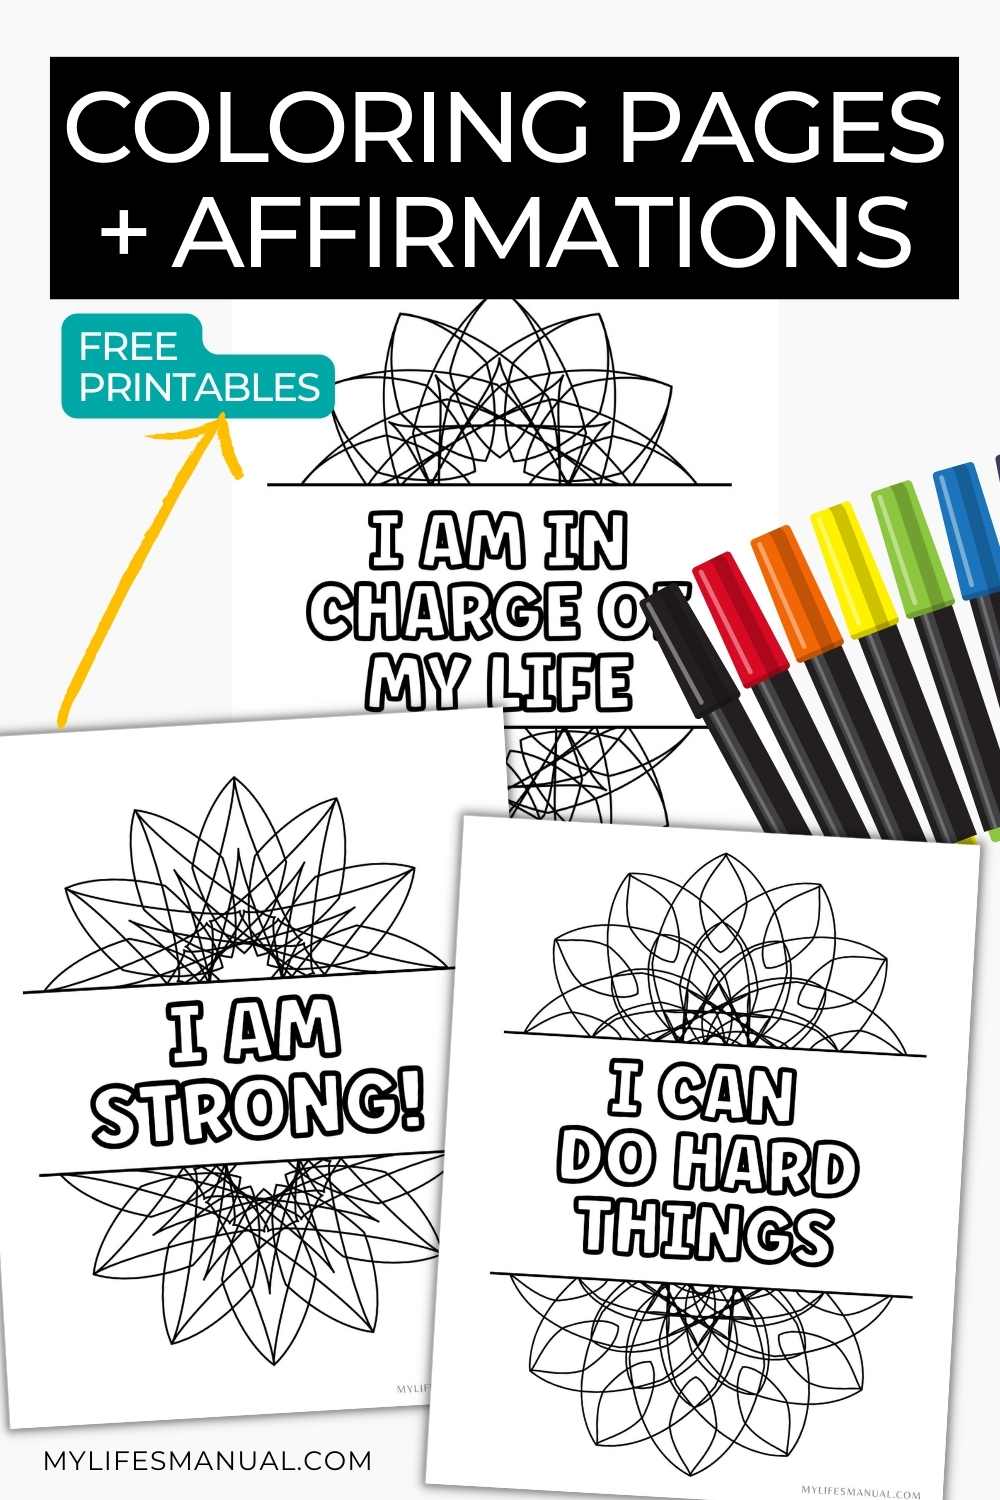 Free adult coloring pages printables and affirmations